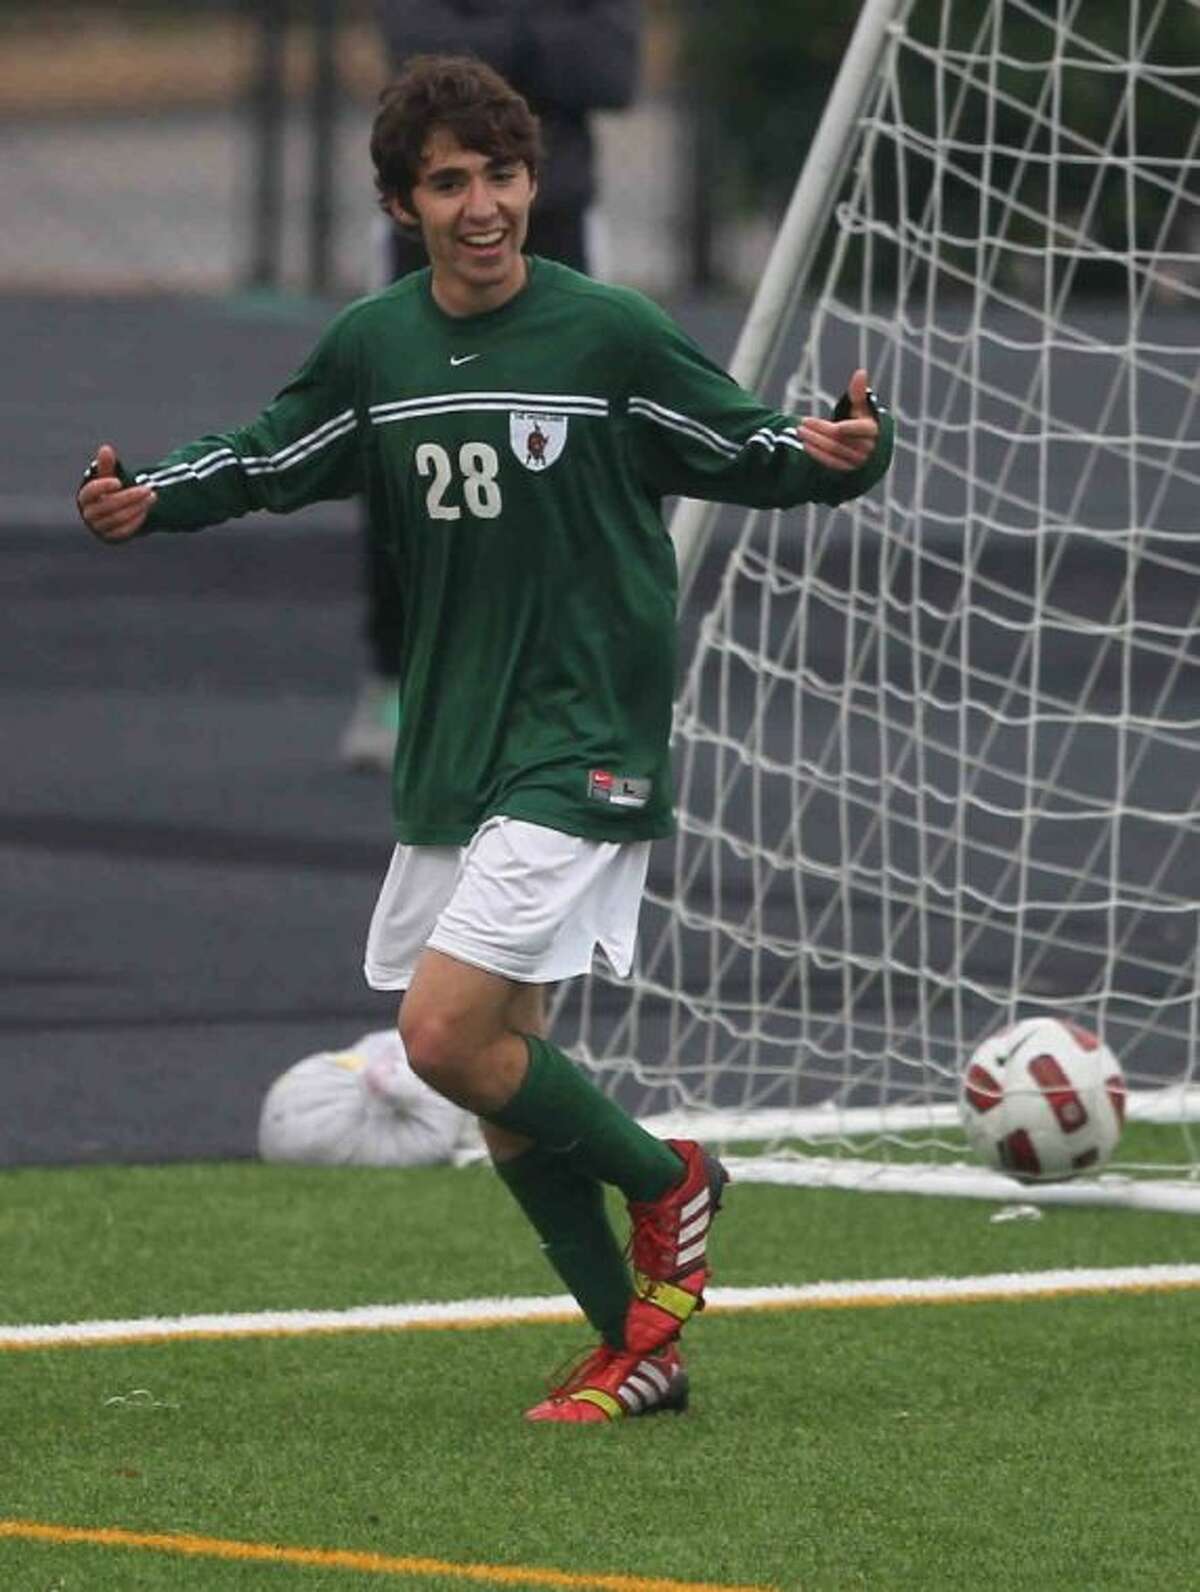 The Woodlands’ Marcelo Tamez celebrates after scoring a goal during a District 14-5A match on Wednesday at Buddy Moorhead Memorial Stadium. To view or purchase this photo and others like it, visit HCNpics.com.